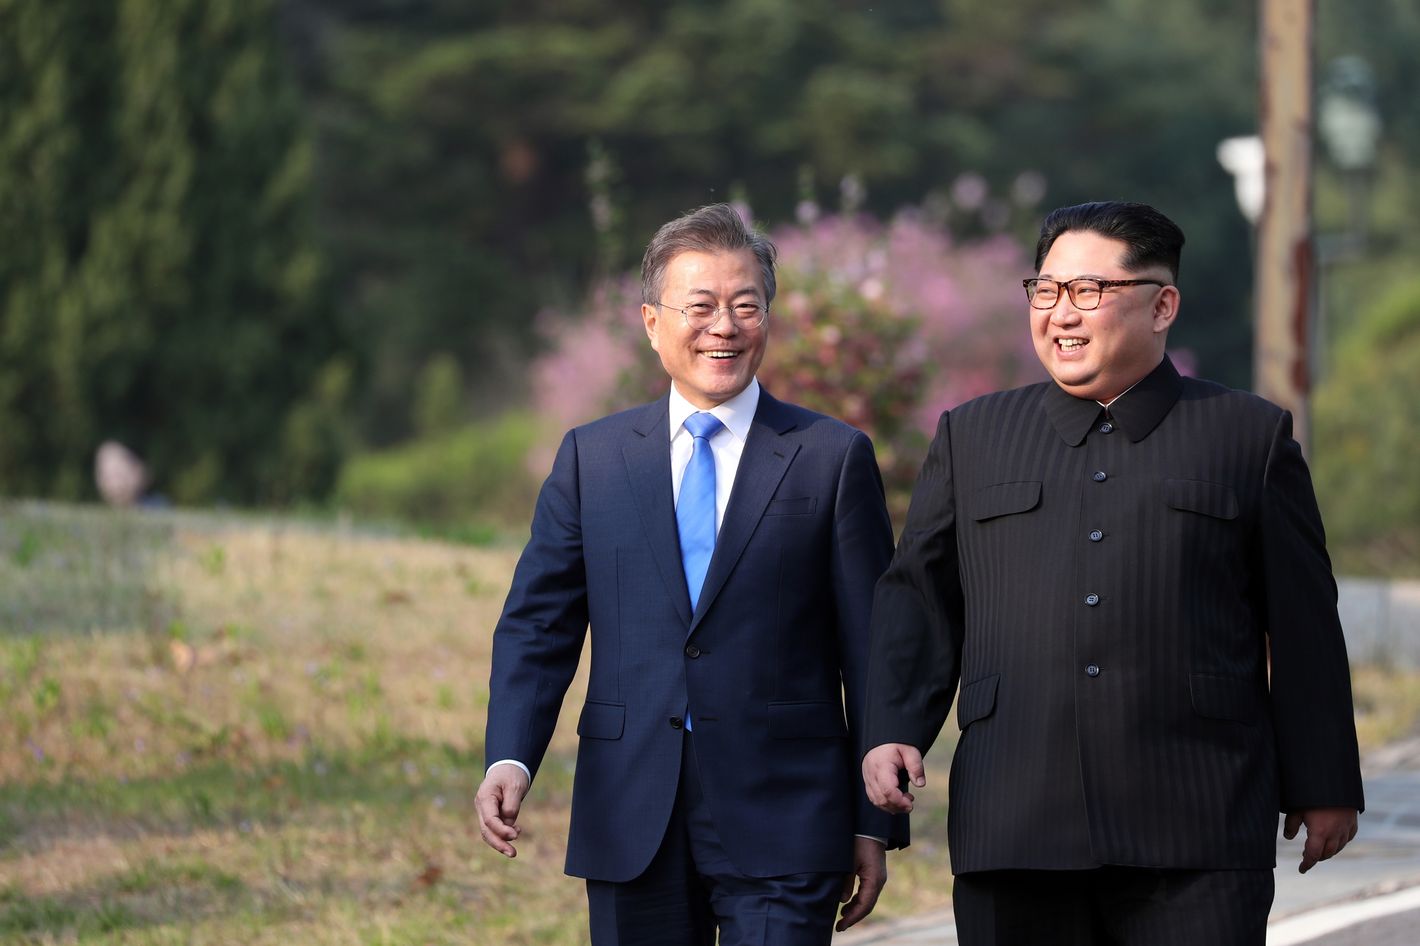 Does the meeting between North and South Korea mean peace?